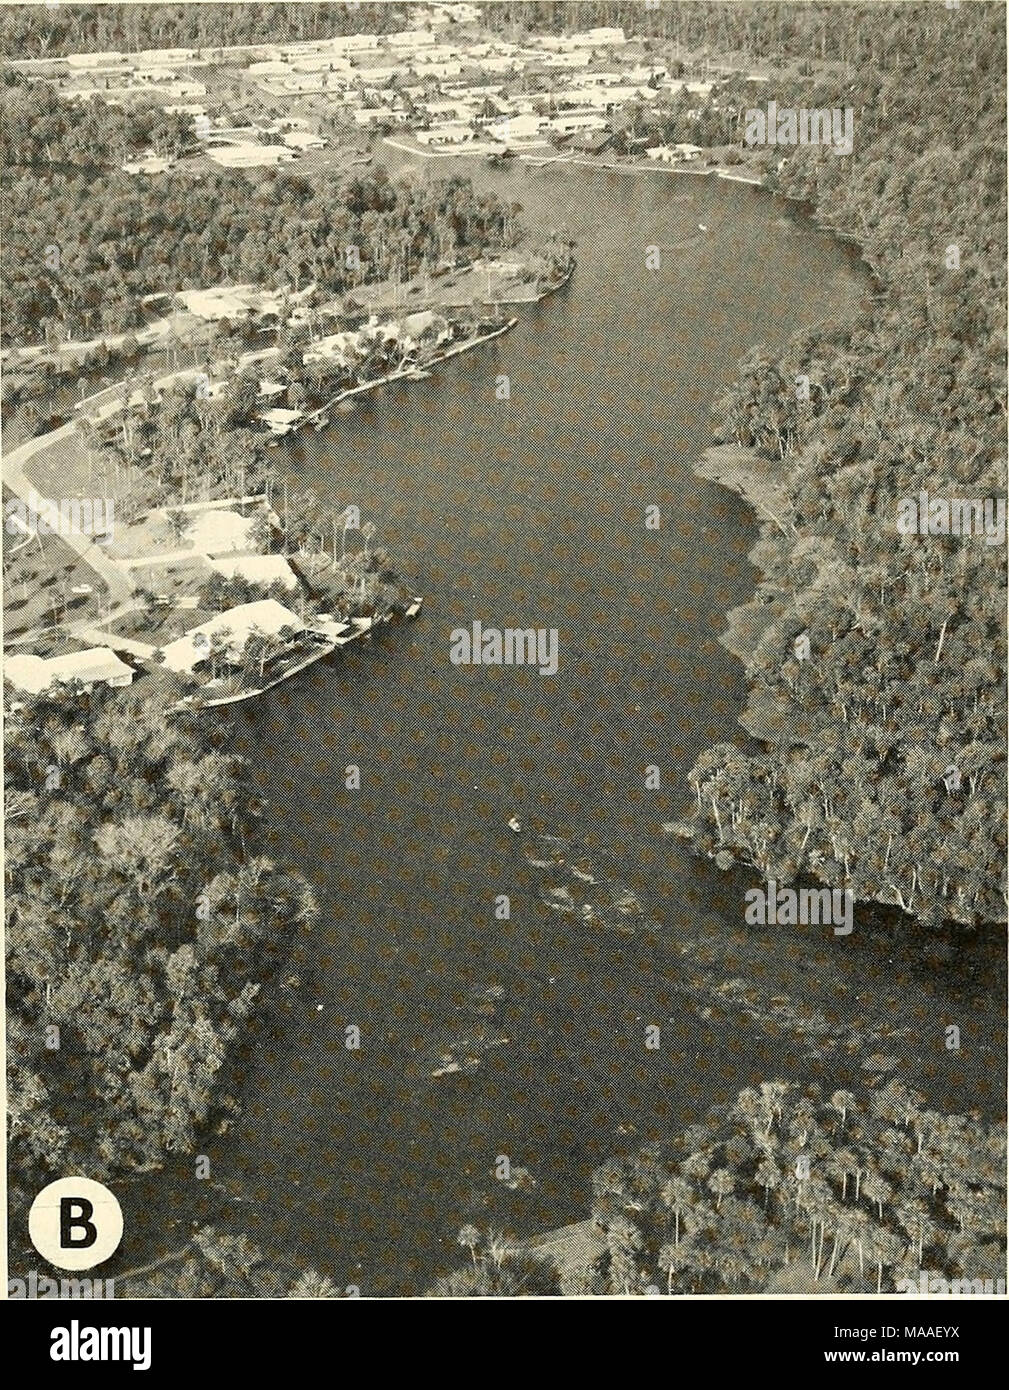 . Ecology and behavior of the Manatee (Trichechus manatus) in Florida . Fig. 2 (cont.) B, headwaters of the Homosassa River. Coastal forest is dominated by cabbage palm (Sabalpalmetto), bald cypress {Taxodiuin distichum), live oak (Quercus virginiana), red maple {Acer rubrum), red-cedar (Juniperus silicicola), magnolia {Mag- nolia virginiana), red-bay {Persea borbonia), and wax-myrtle {Myrica cerifera). Of the five major stream types in Florida recognized by Beck (1965), spring-fed rivers such as the Crystal, Homosassa, and Chas- sahowitzka are classified as calcareous streams, as distinct fro Stock Photo